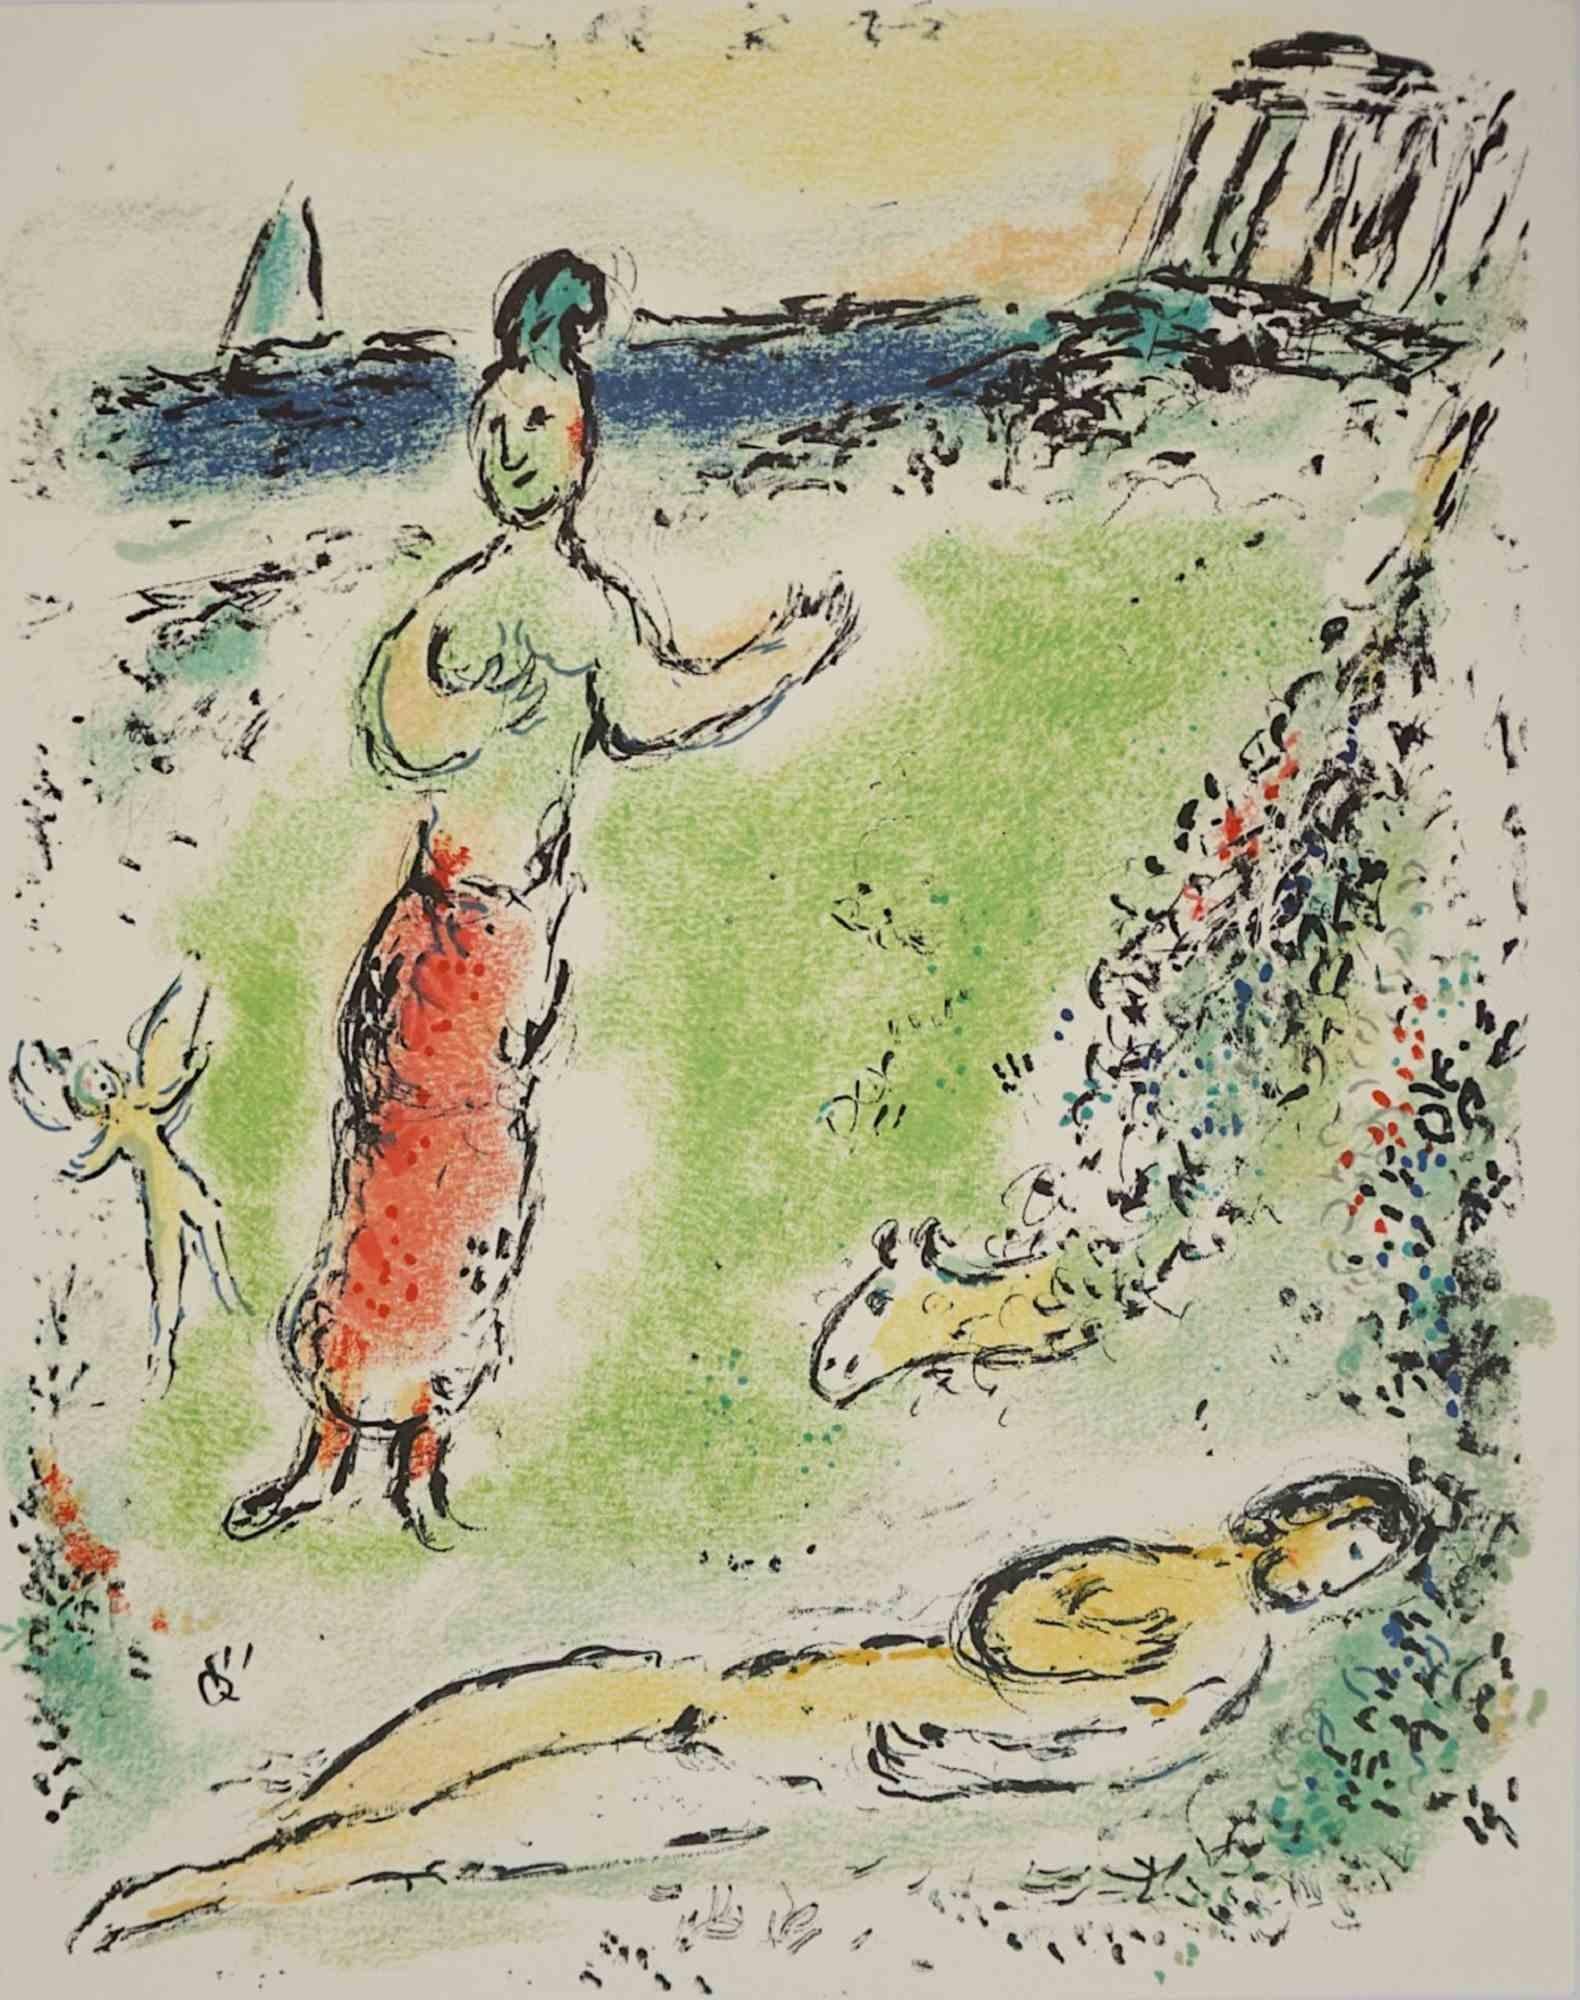 Athena puts Odysseus to sleep is a splendid artwork realized by Marc Chagall in 1975.

Mixed colored lithograph on paper.

This beautiful artwork is from the German edition of Chagall's Odyssey that was published by Daco Verlag in Stuttgart, printed